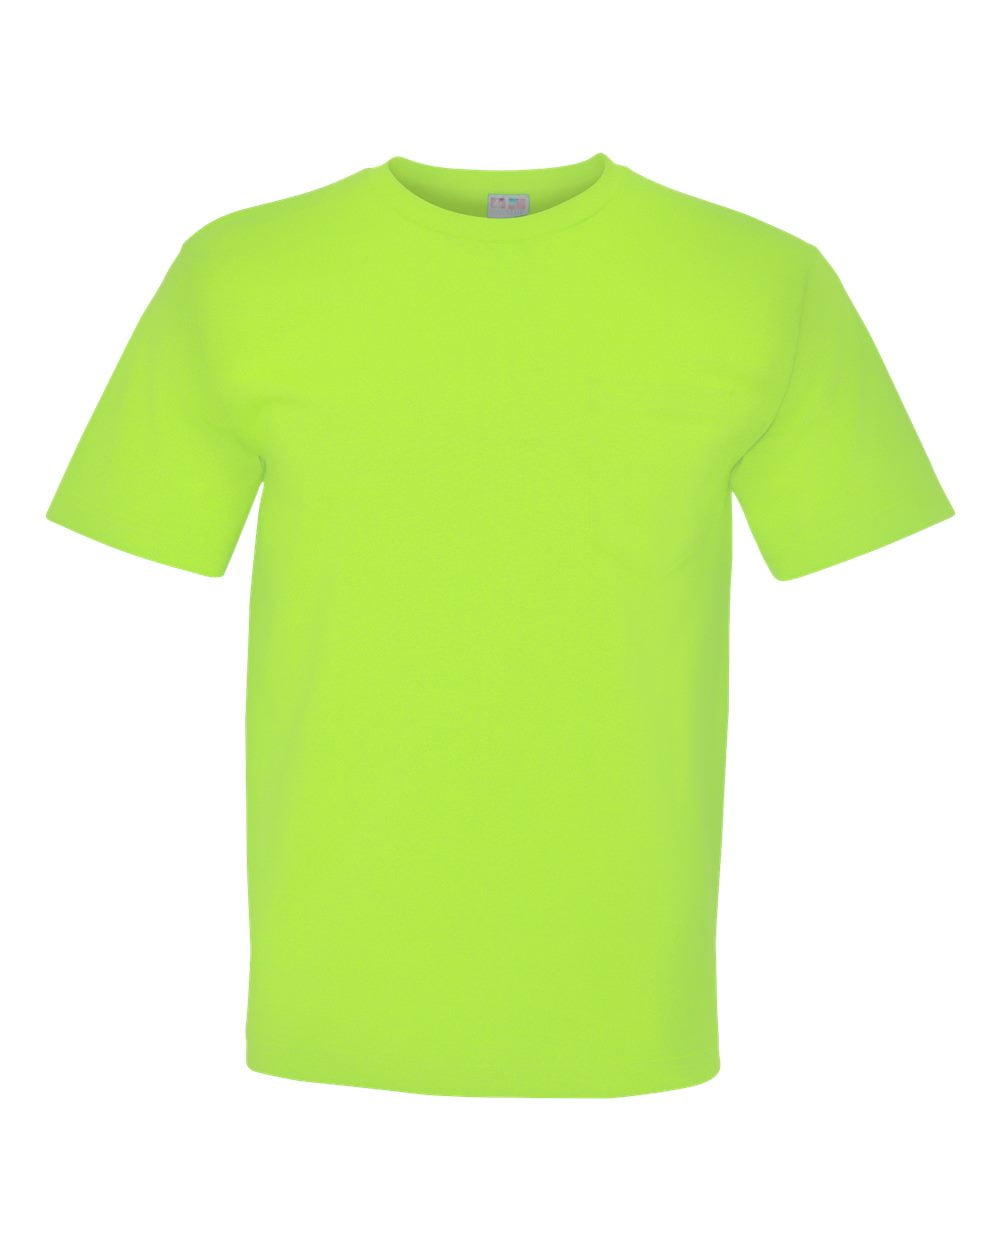 Bayside Apparel USA-Made Long Sleeve T-Shirt with a Pocket XL/Lime Green 